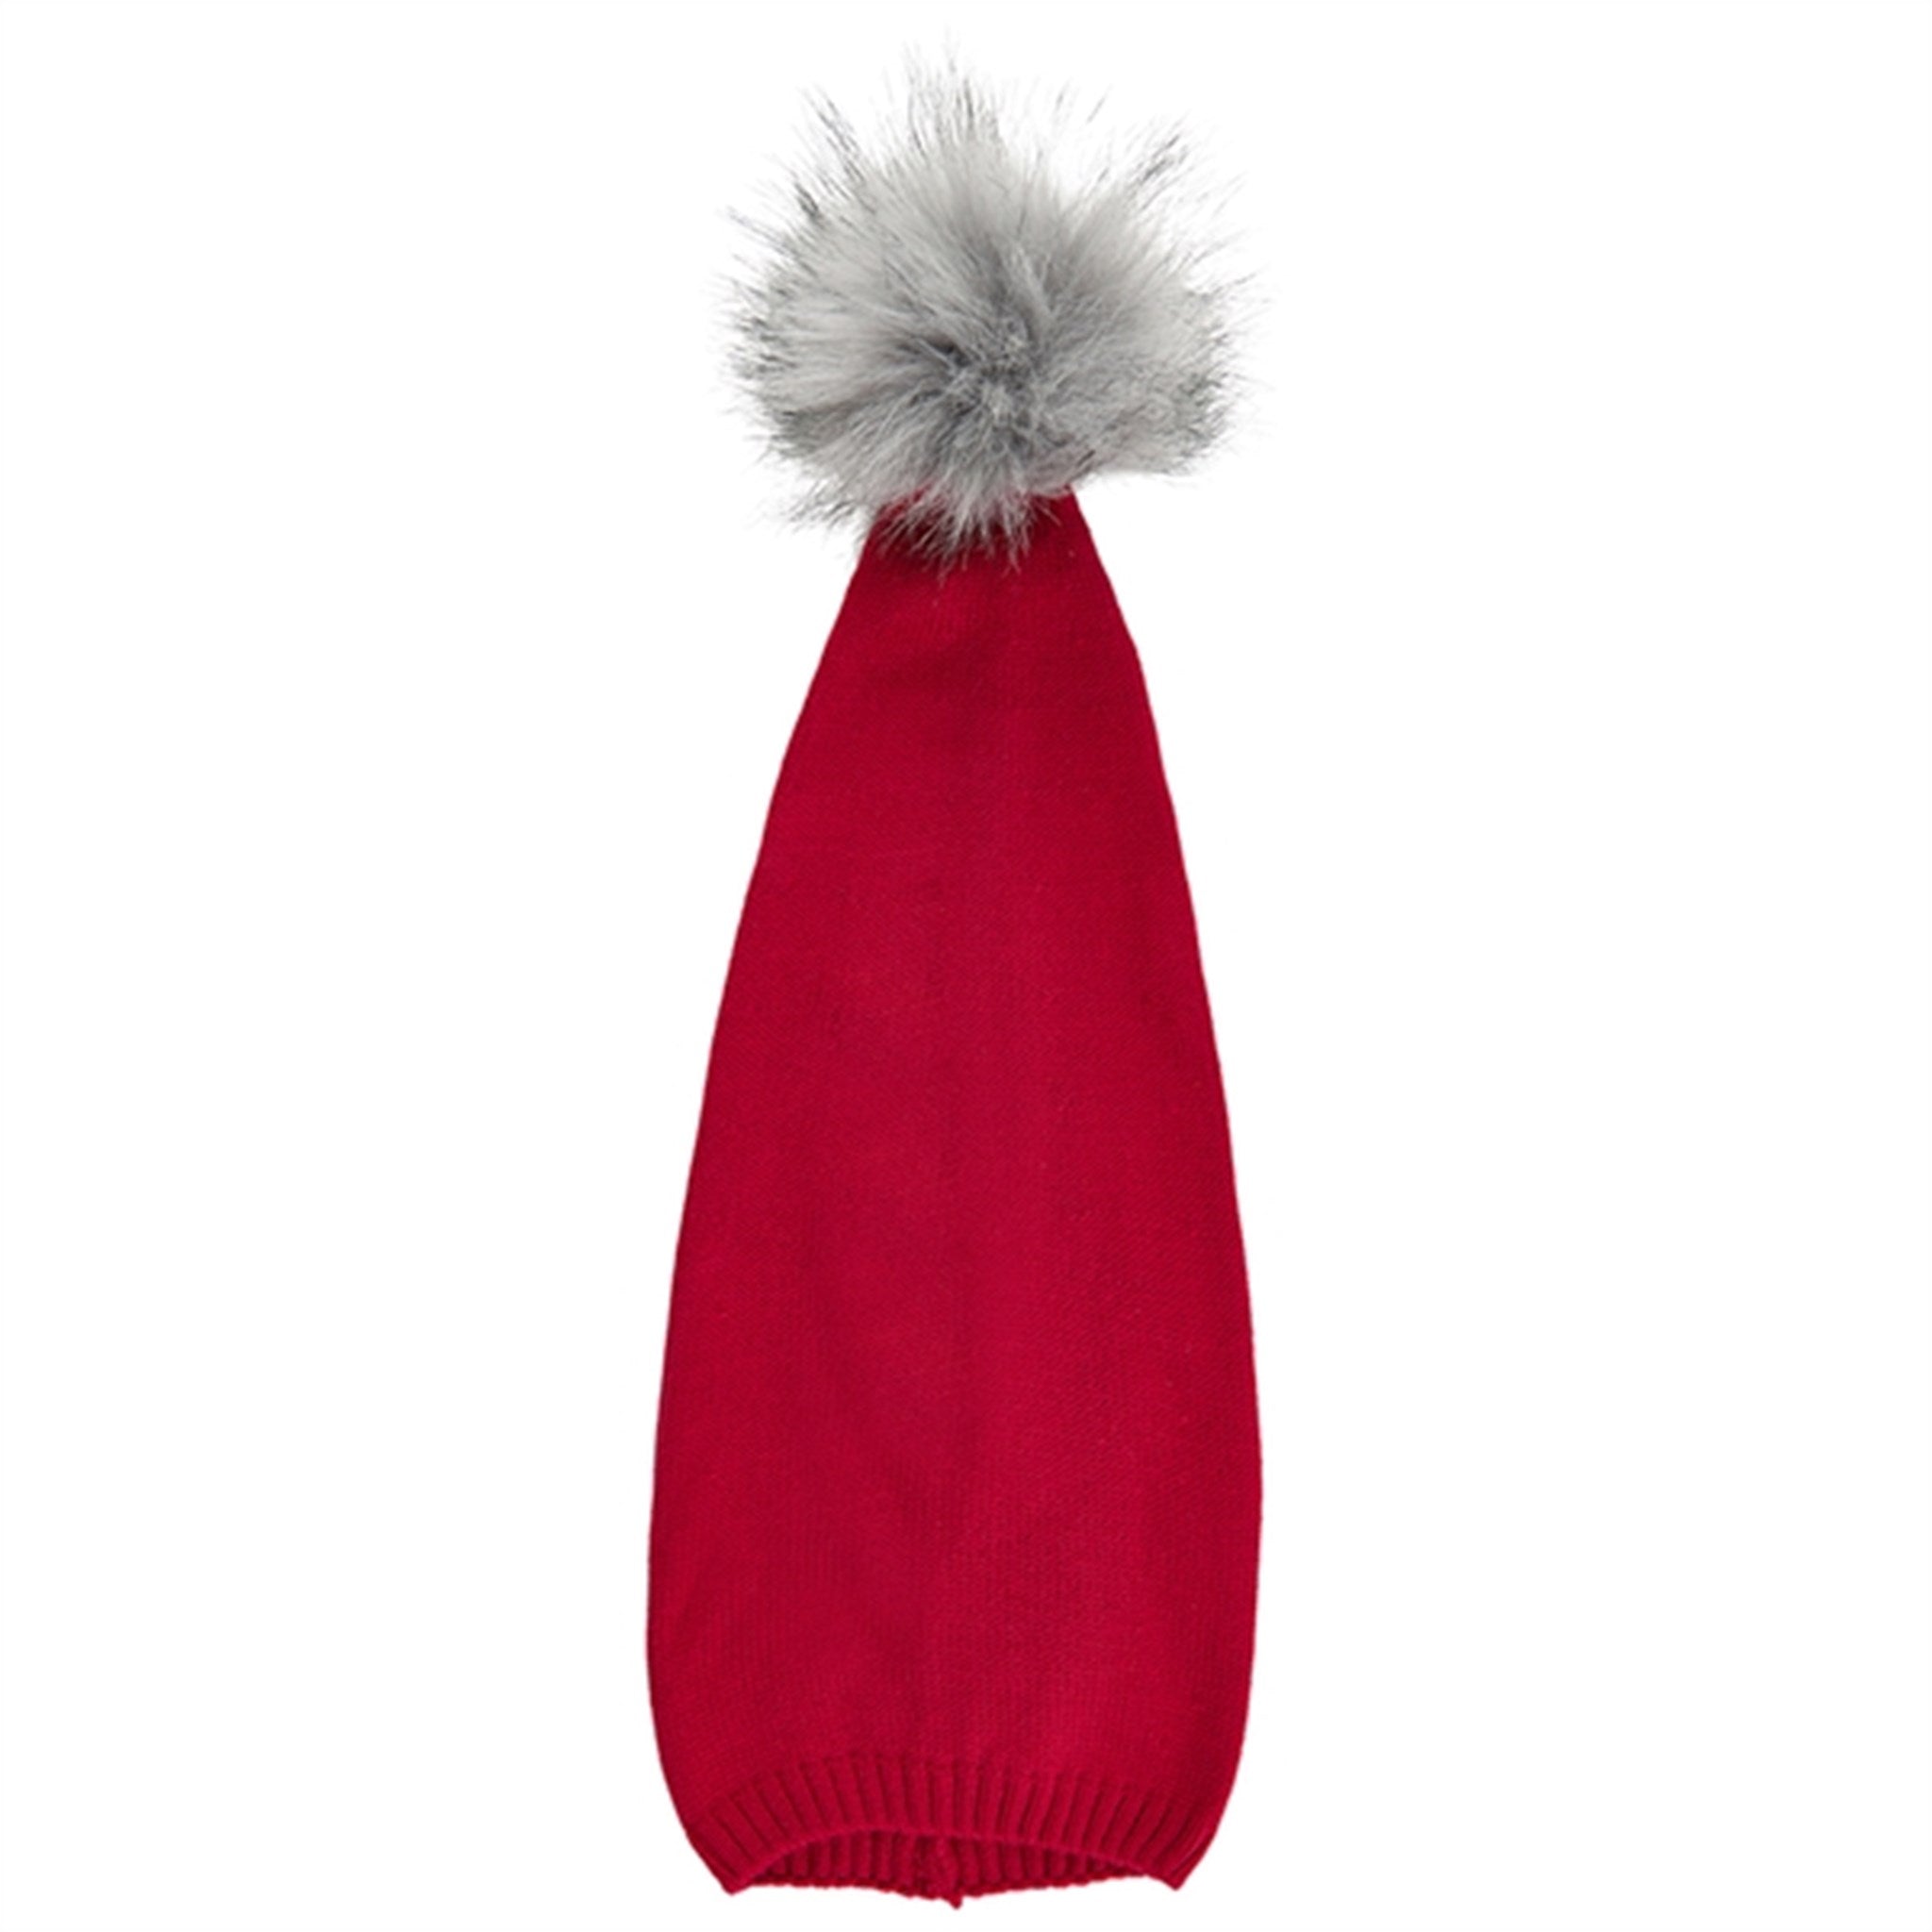 The New Chili Pepper Holiday Christmas Hat